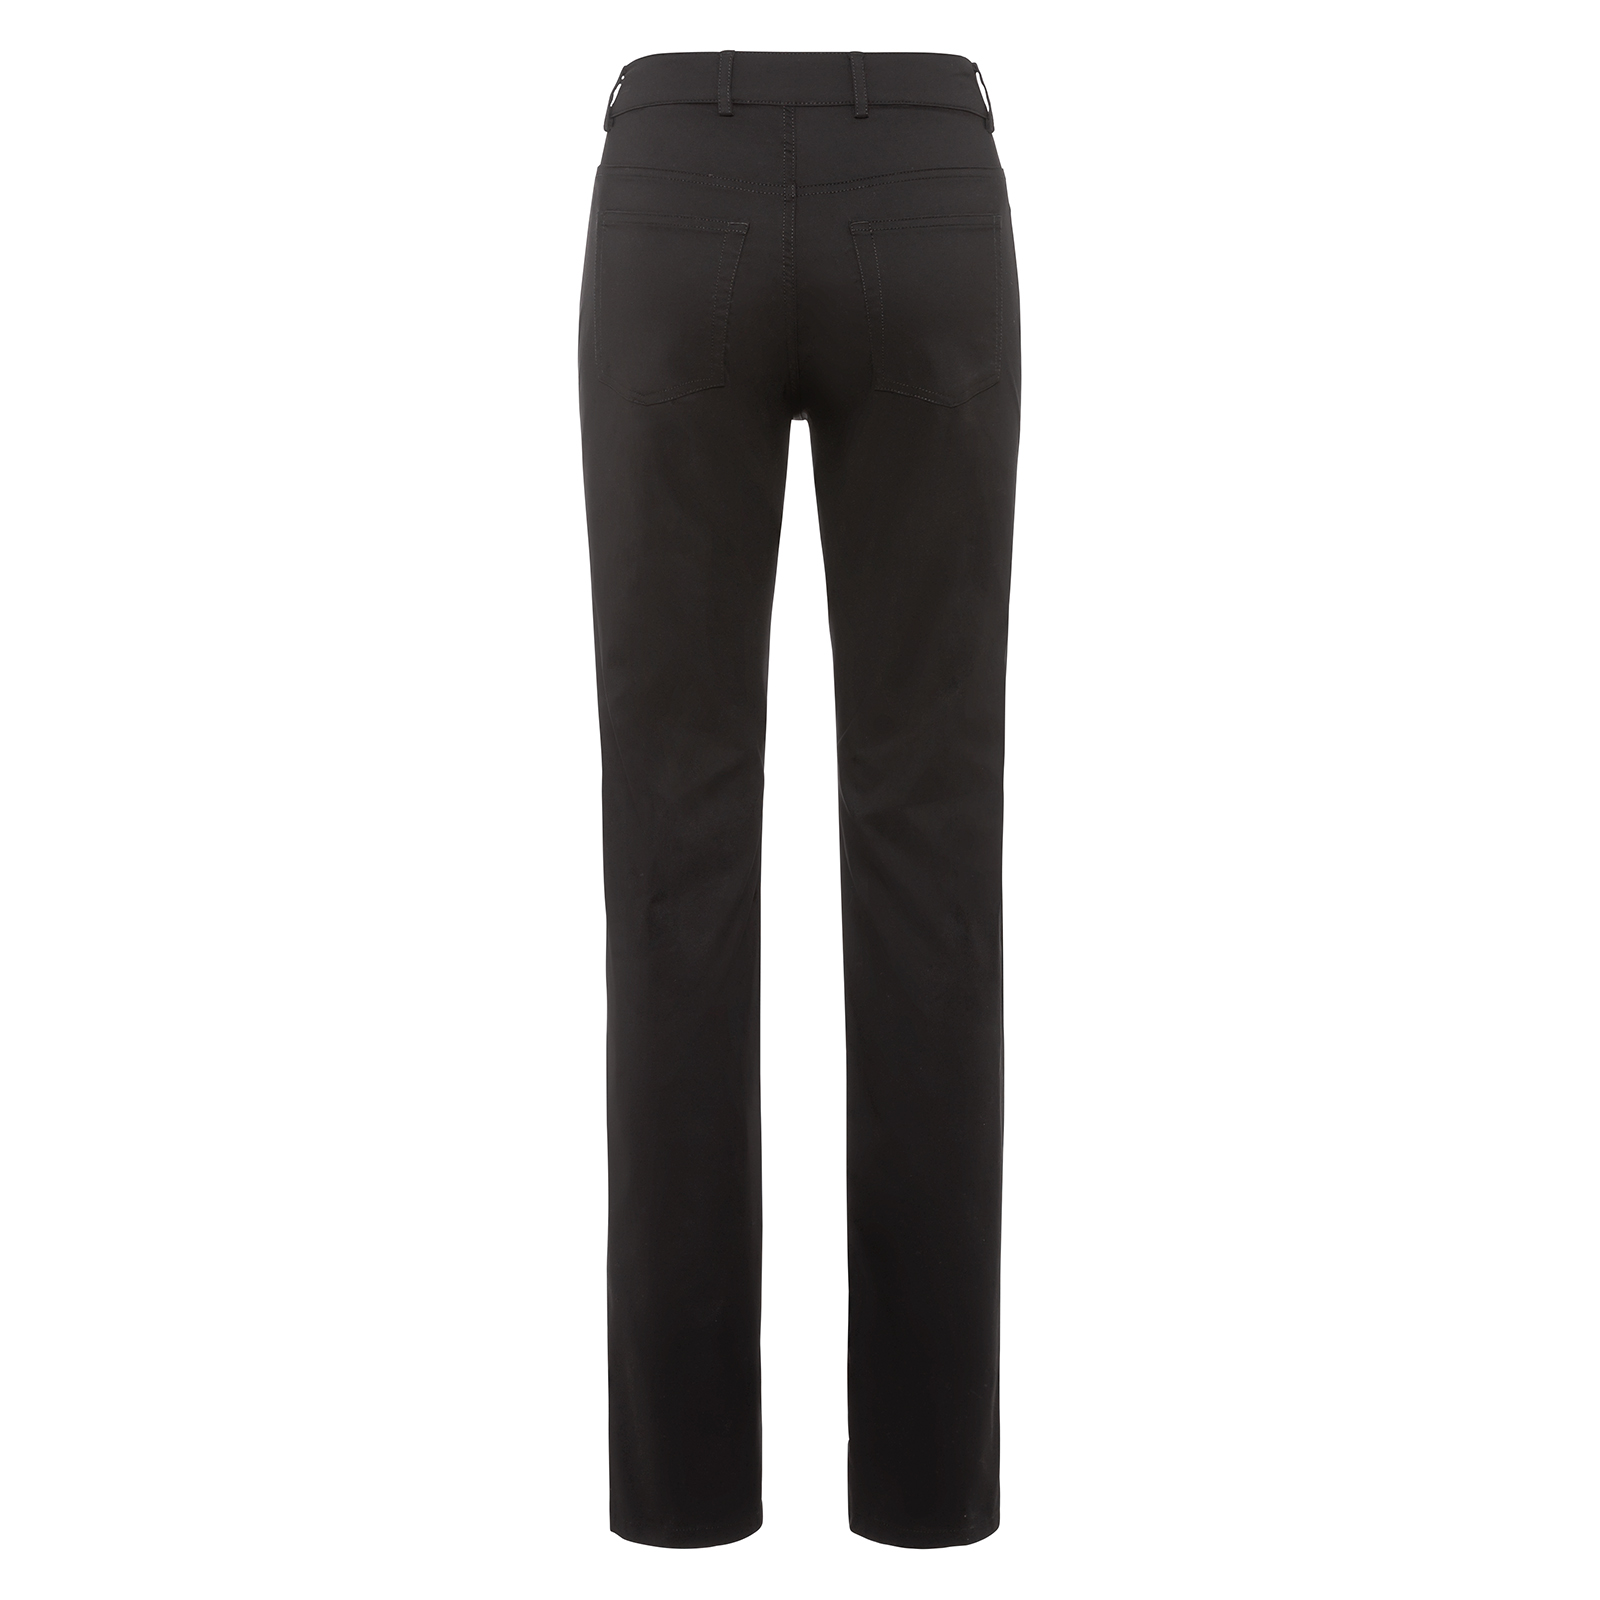 Flexible ladies' trousers made from a particularly lightweight textile material